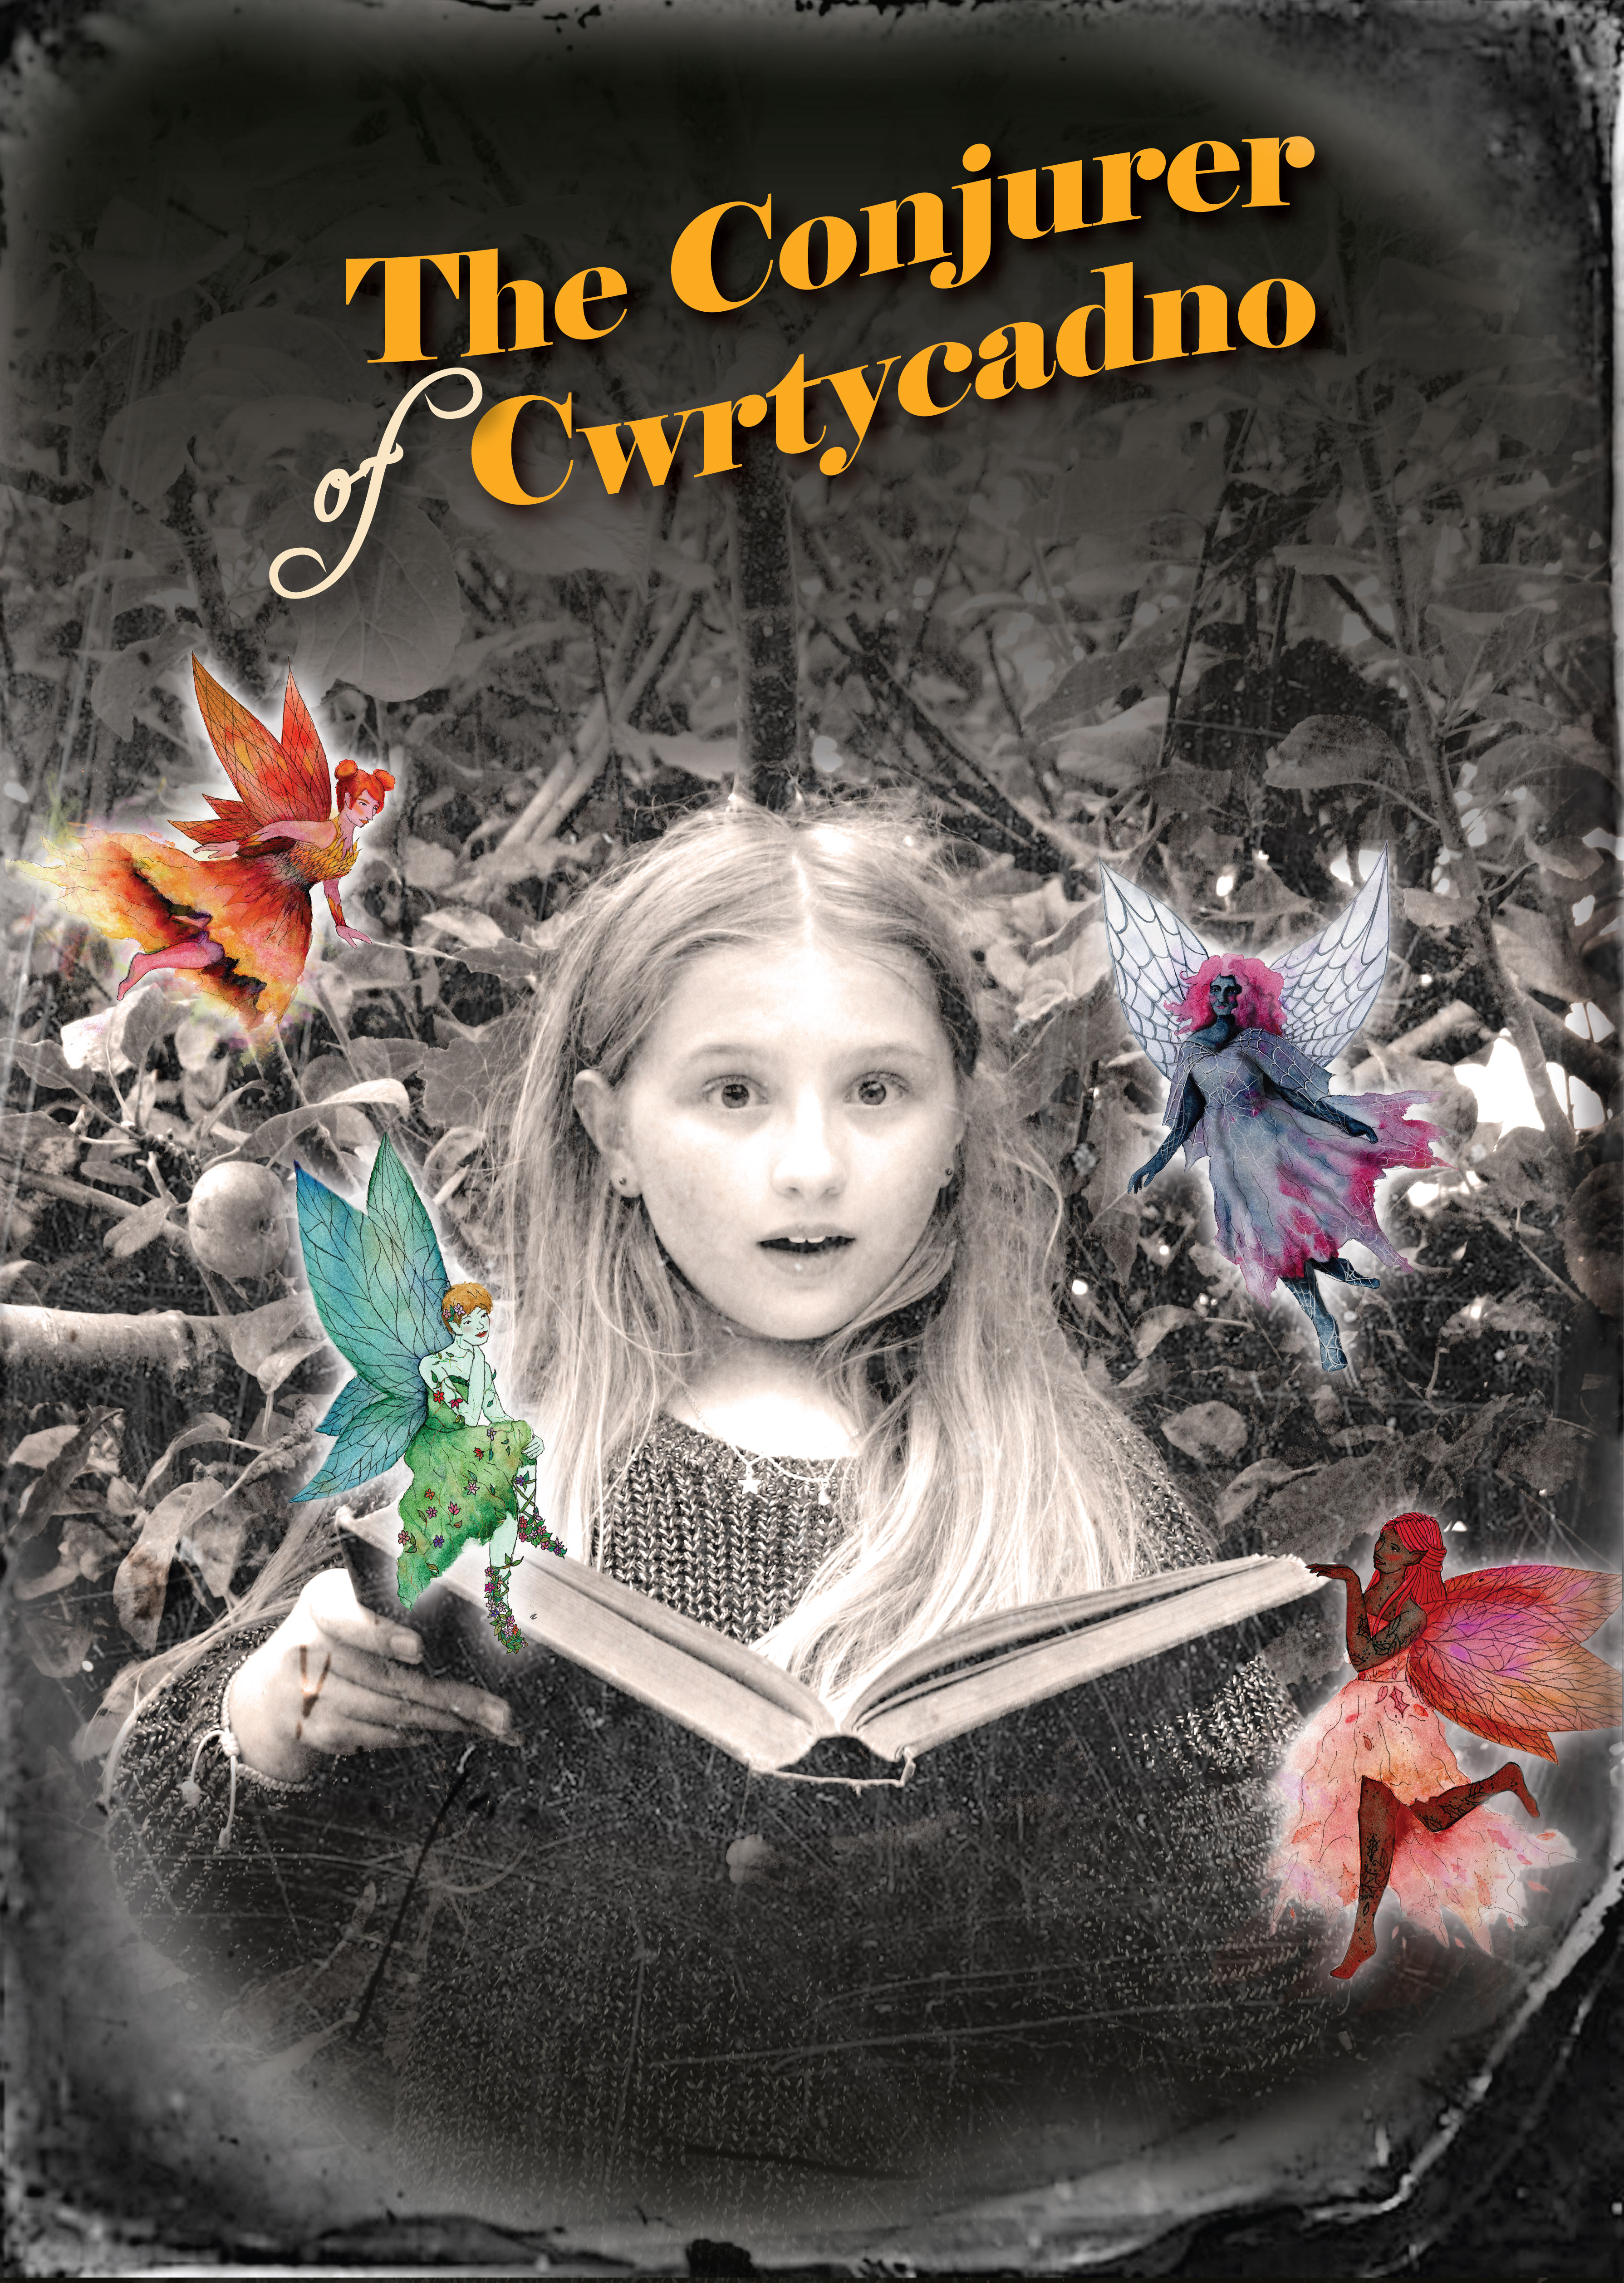 Poster for the Conjurer of Cwrtycadno. In B&W a young girl with long blond hair looks surprised - an old book is open in her hands. Around her and the book are four fairies in orange, pink, green and purple representing the four seasons